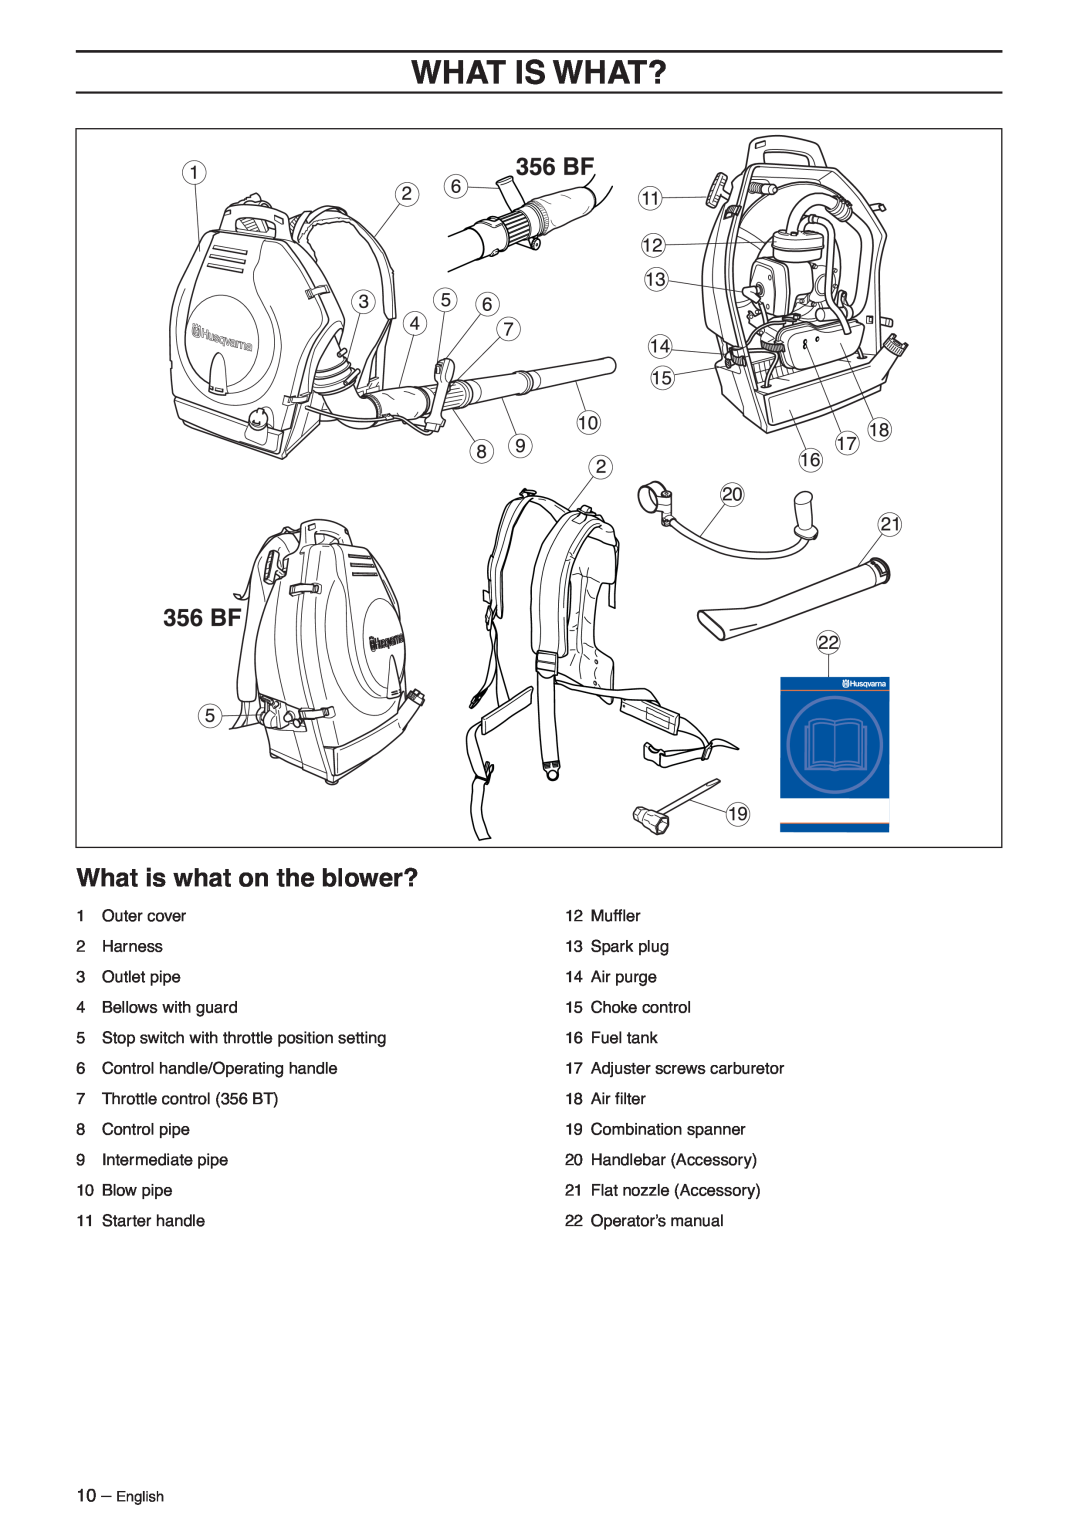 Husqvarna 356BF X-series, 356 BT X-series manual What Is What?, What is what on the blower? 